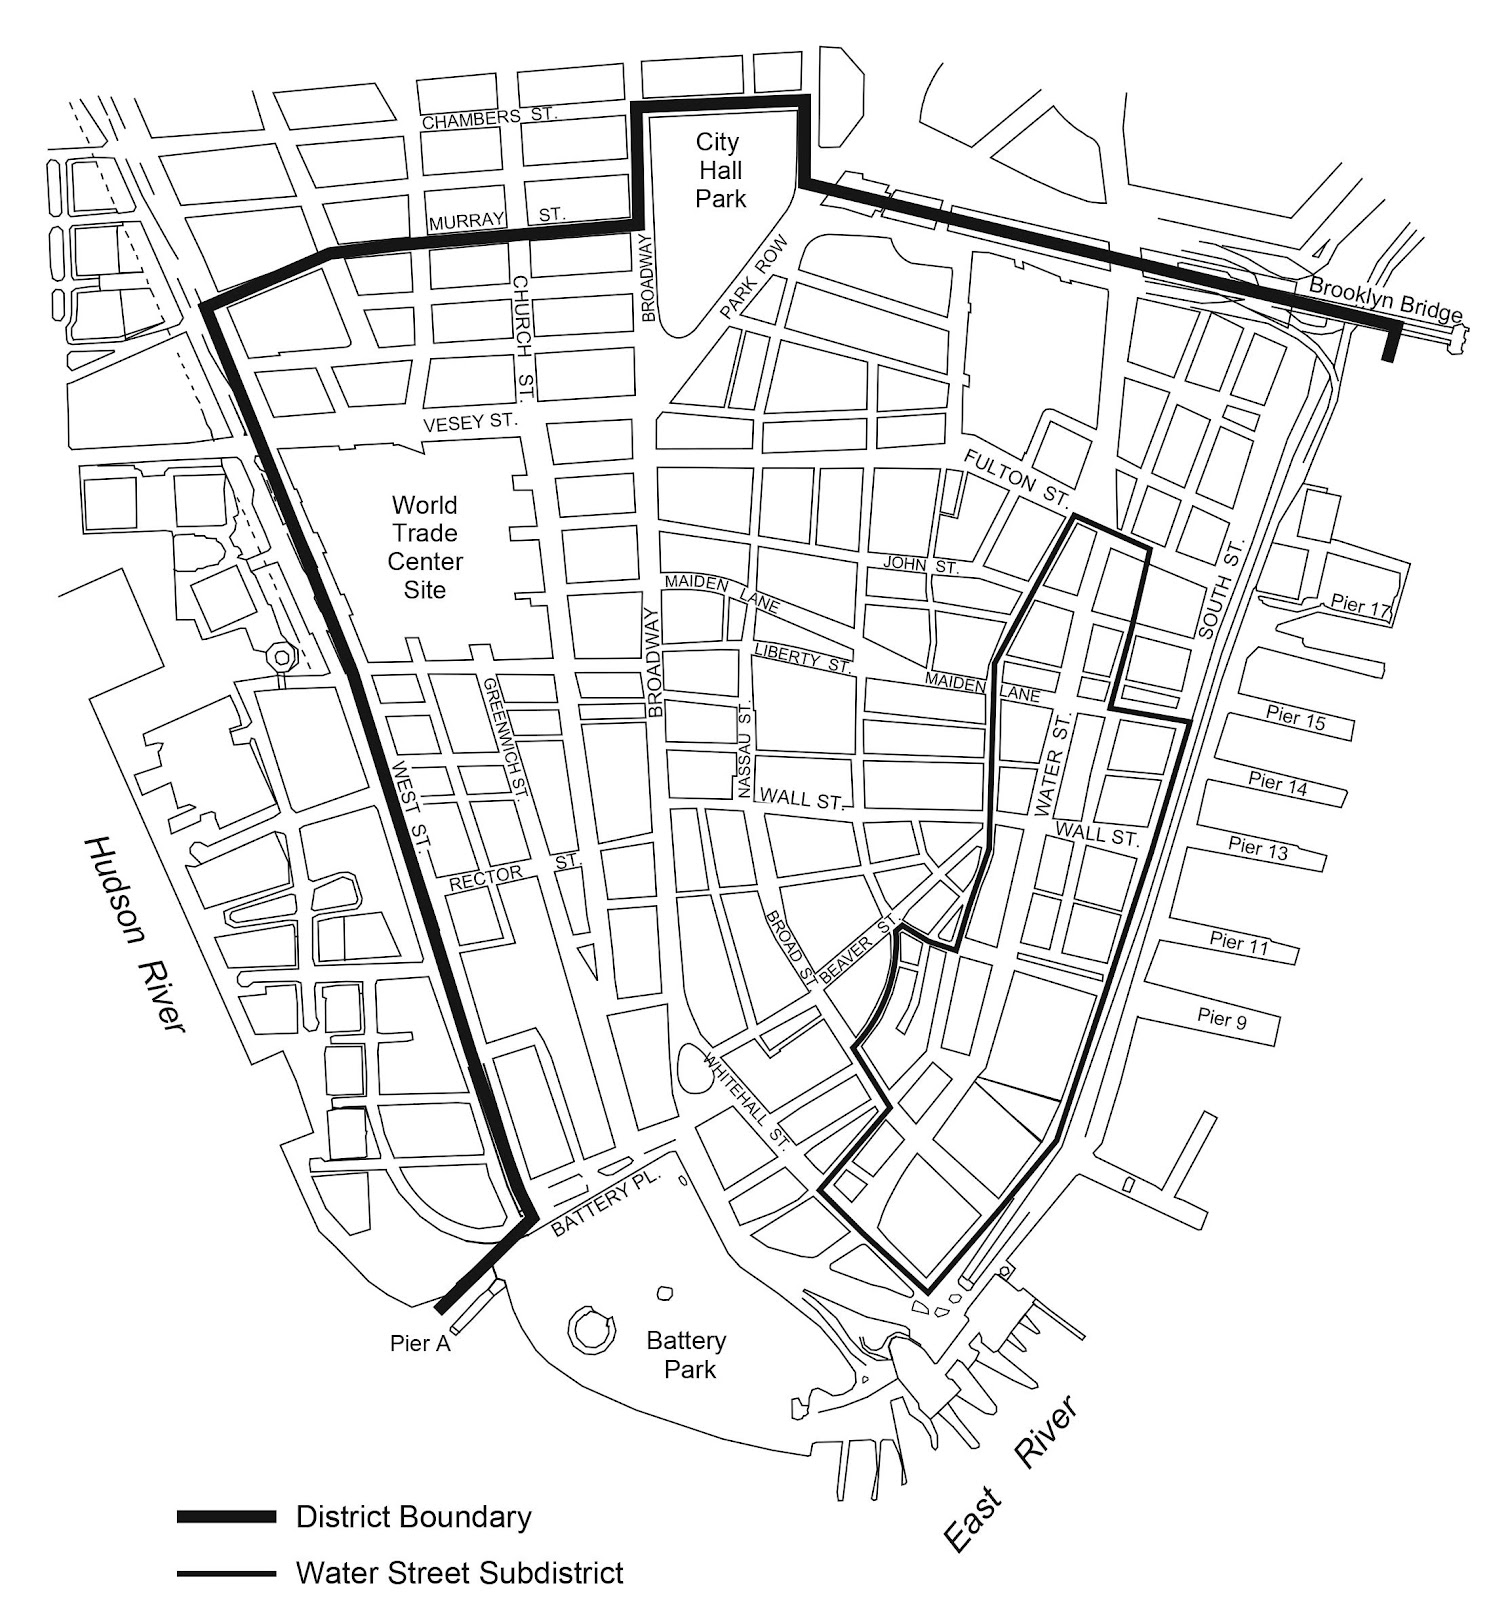 Zoning Resolutions Chapter 1: Special Lower Manhattan District Appendix A.7